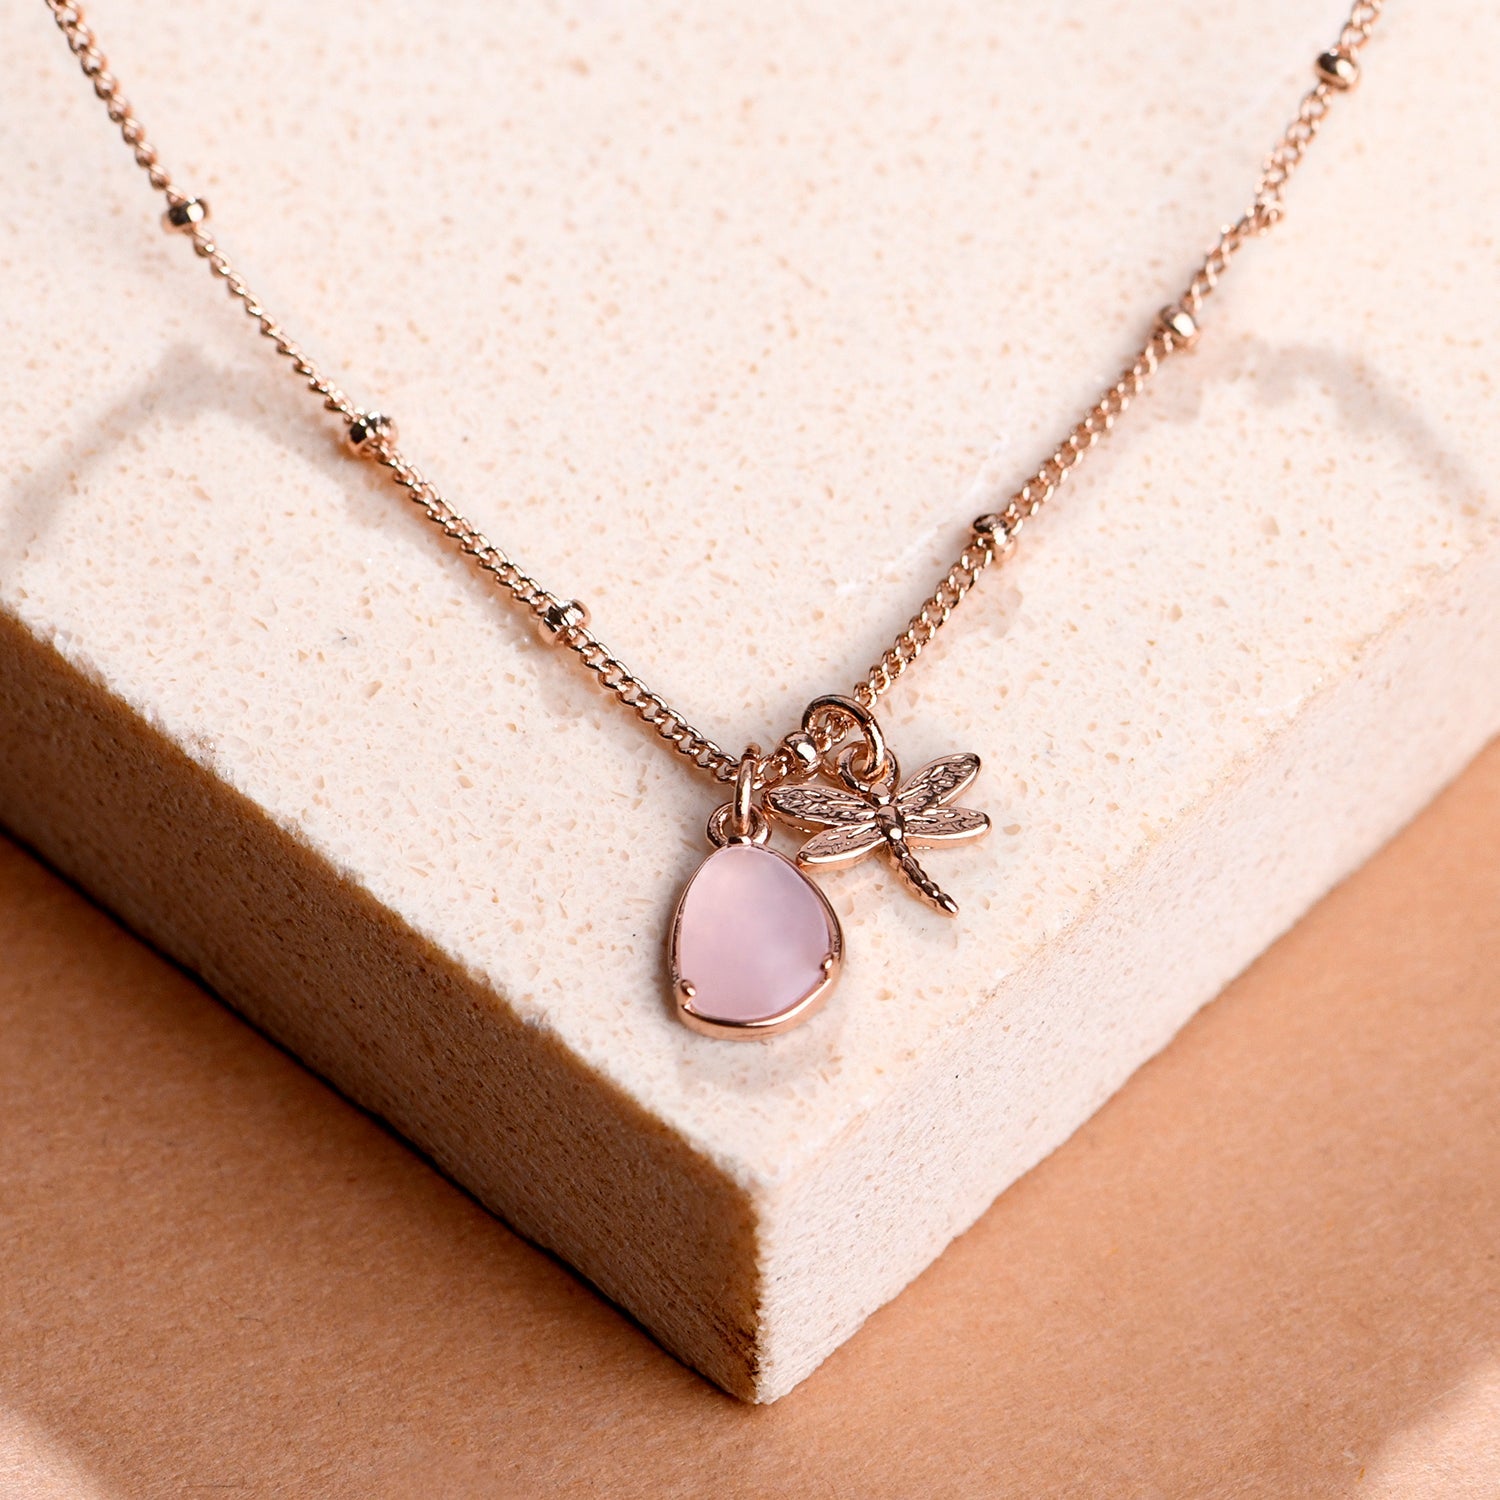 Real Gold Plated Rose gold Dragonfly & Rose Quartz Pendant